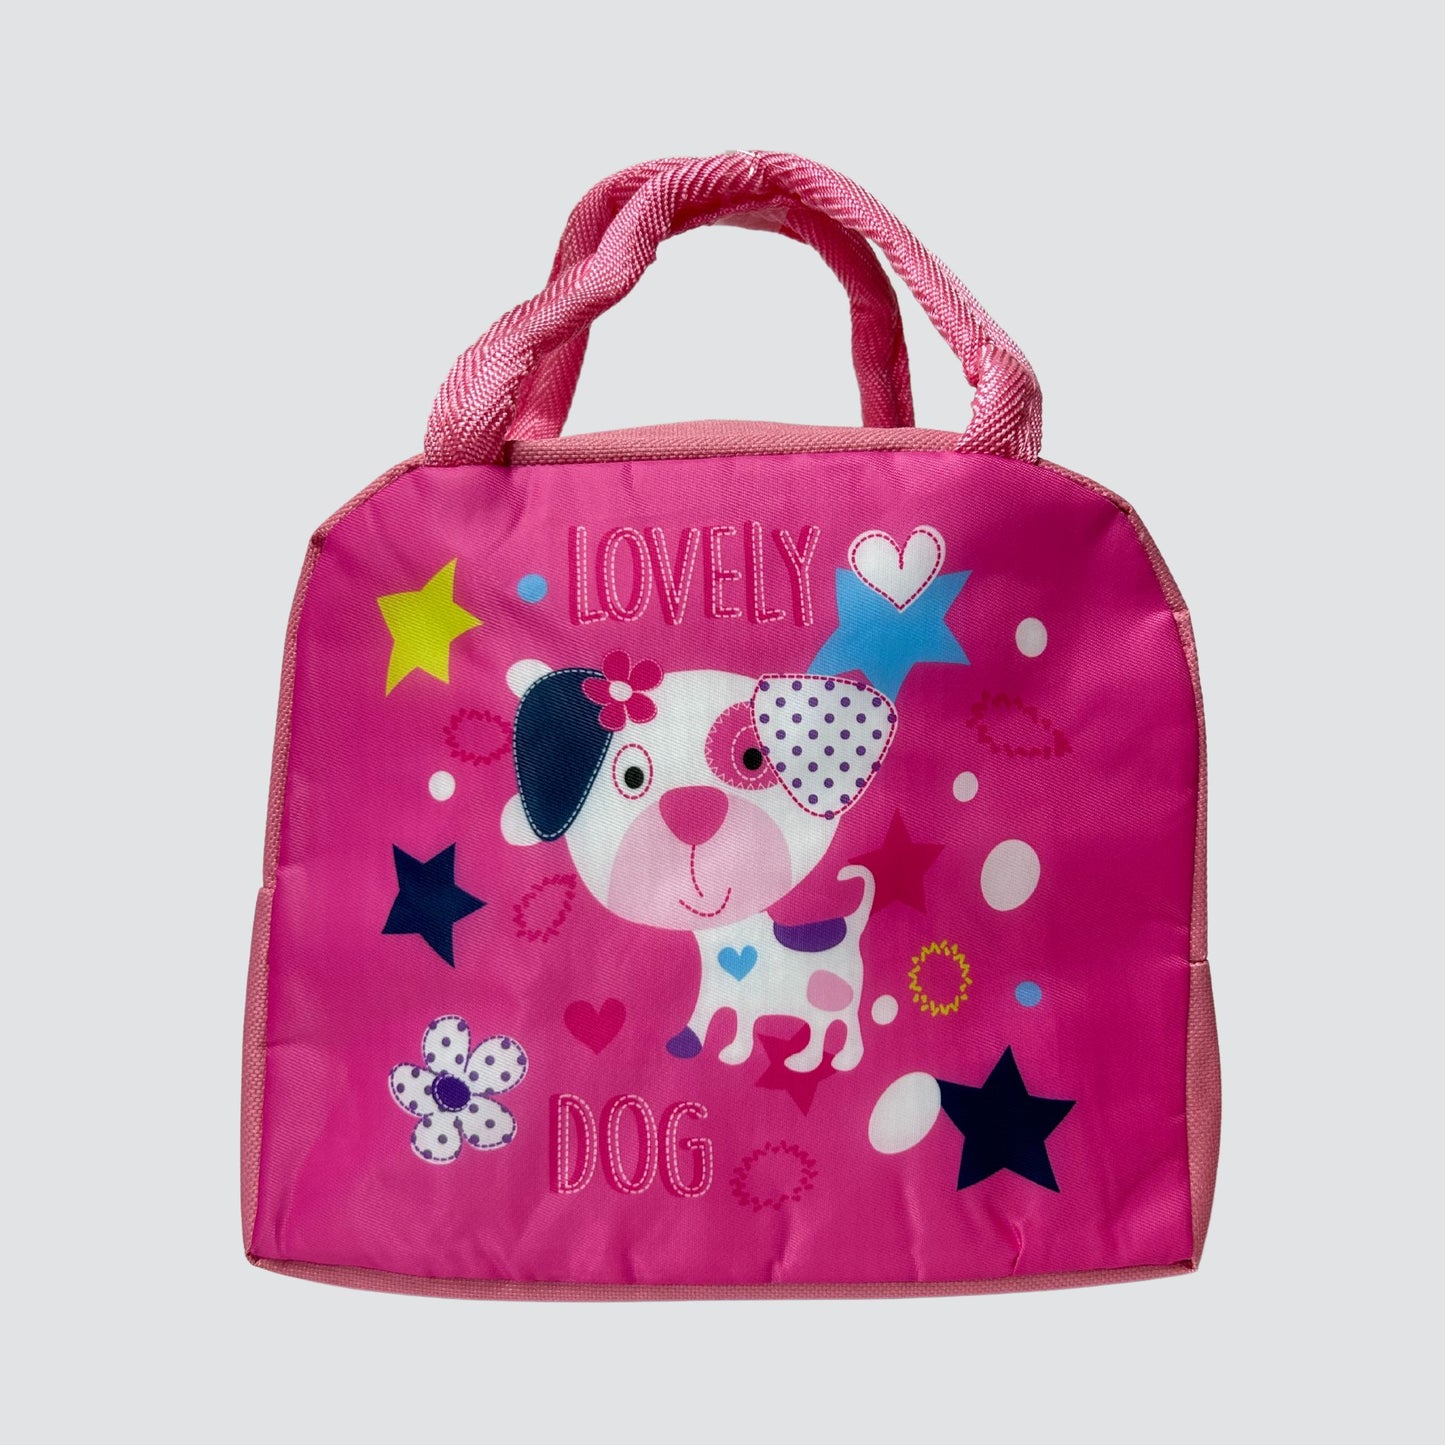 A1539 Animal Print Insulated Lunch Bag